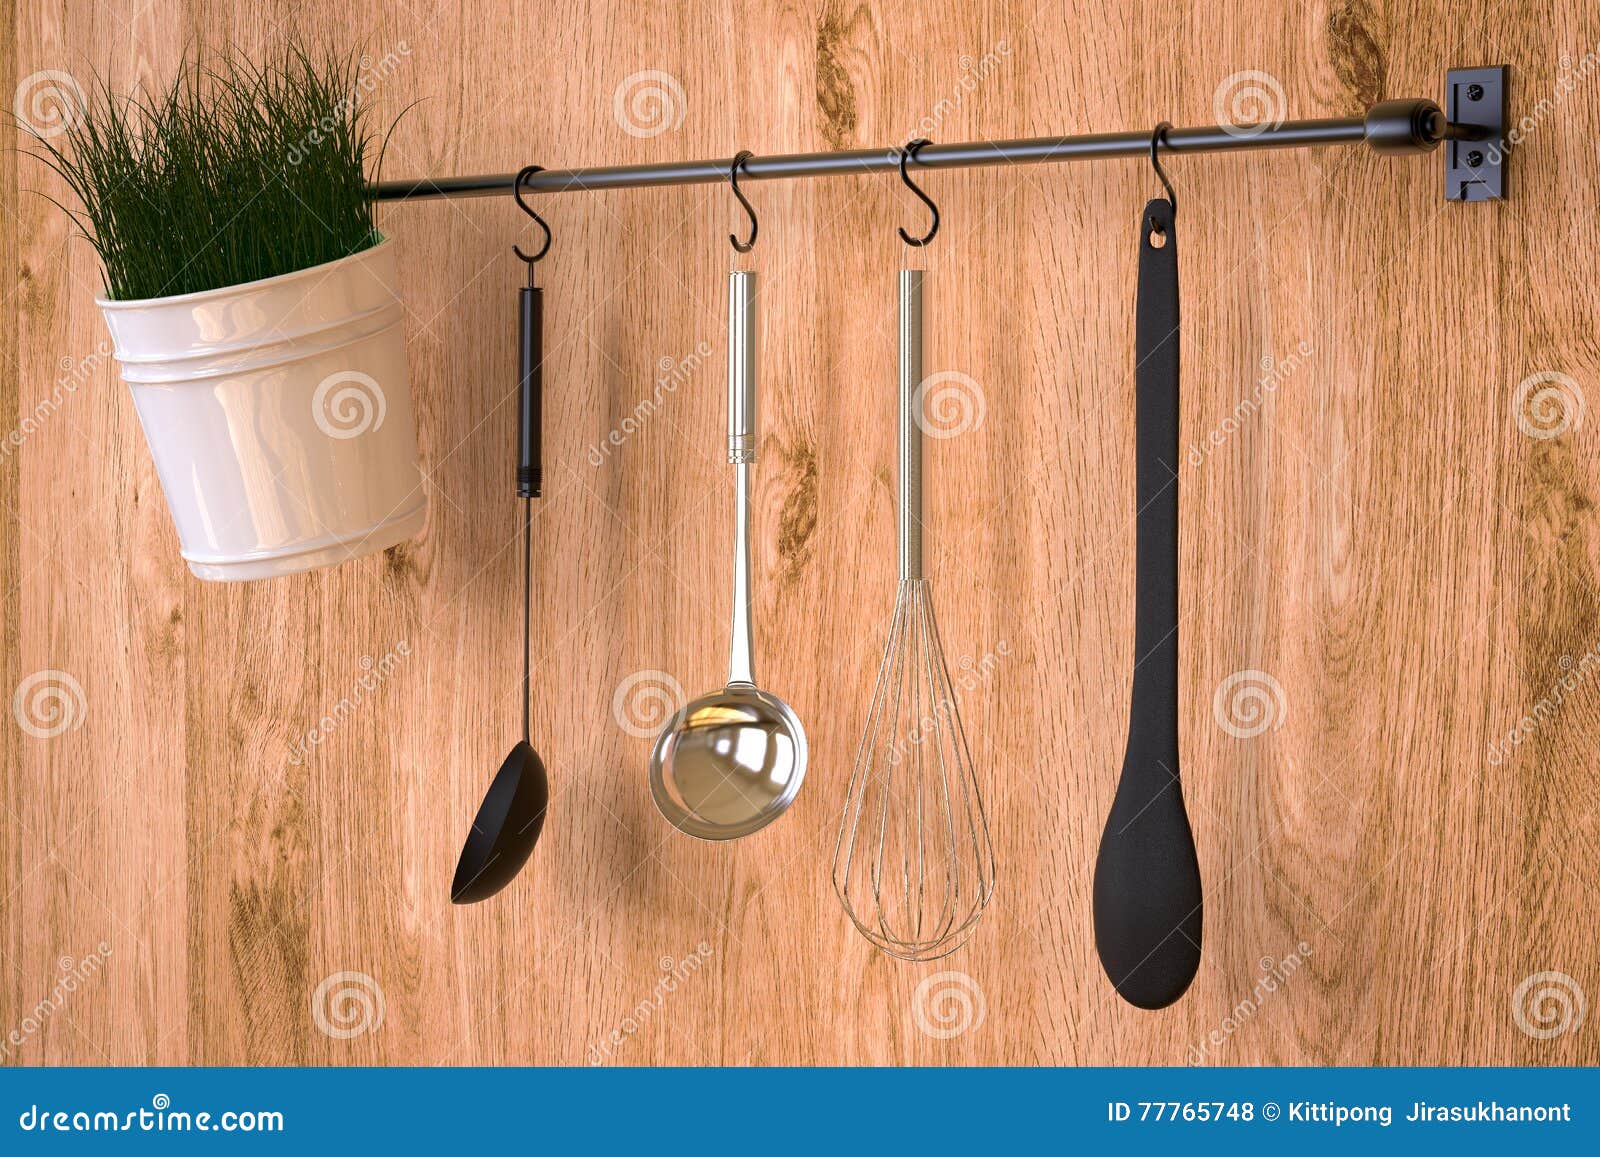 kitchen rack on wooden wall